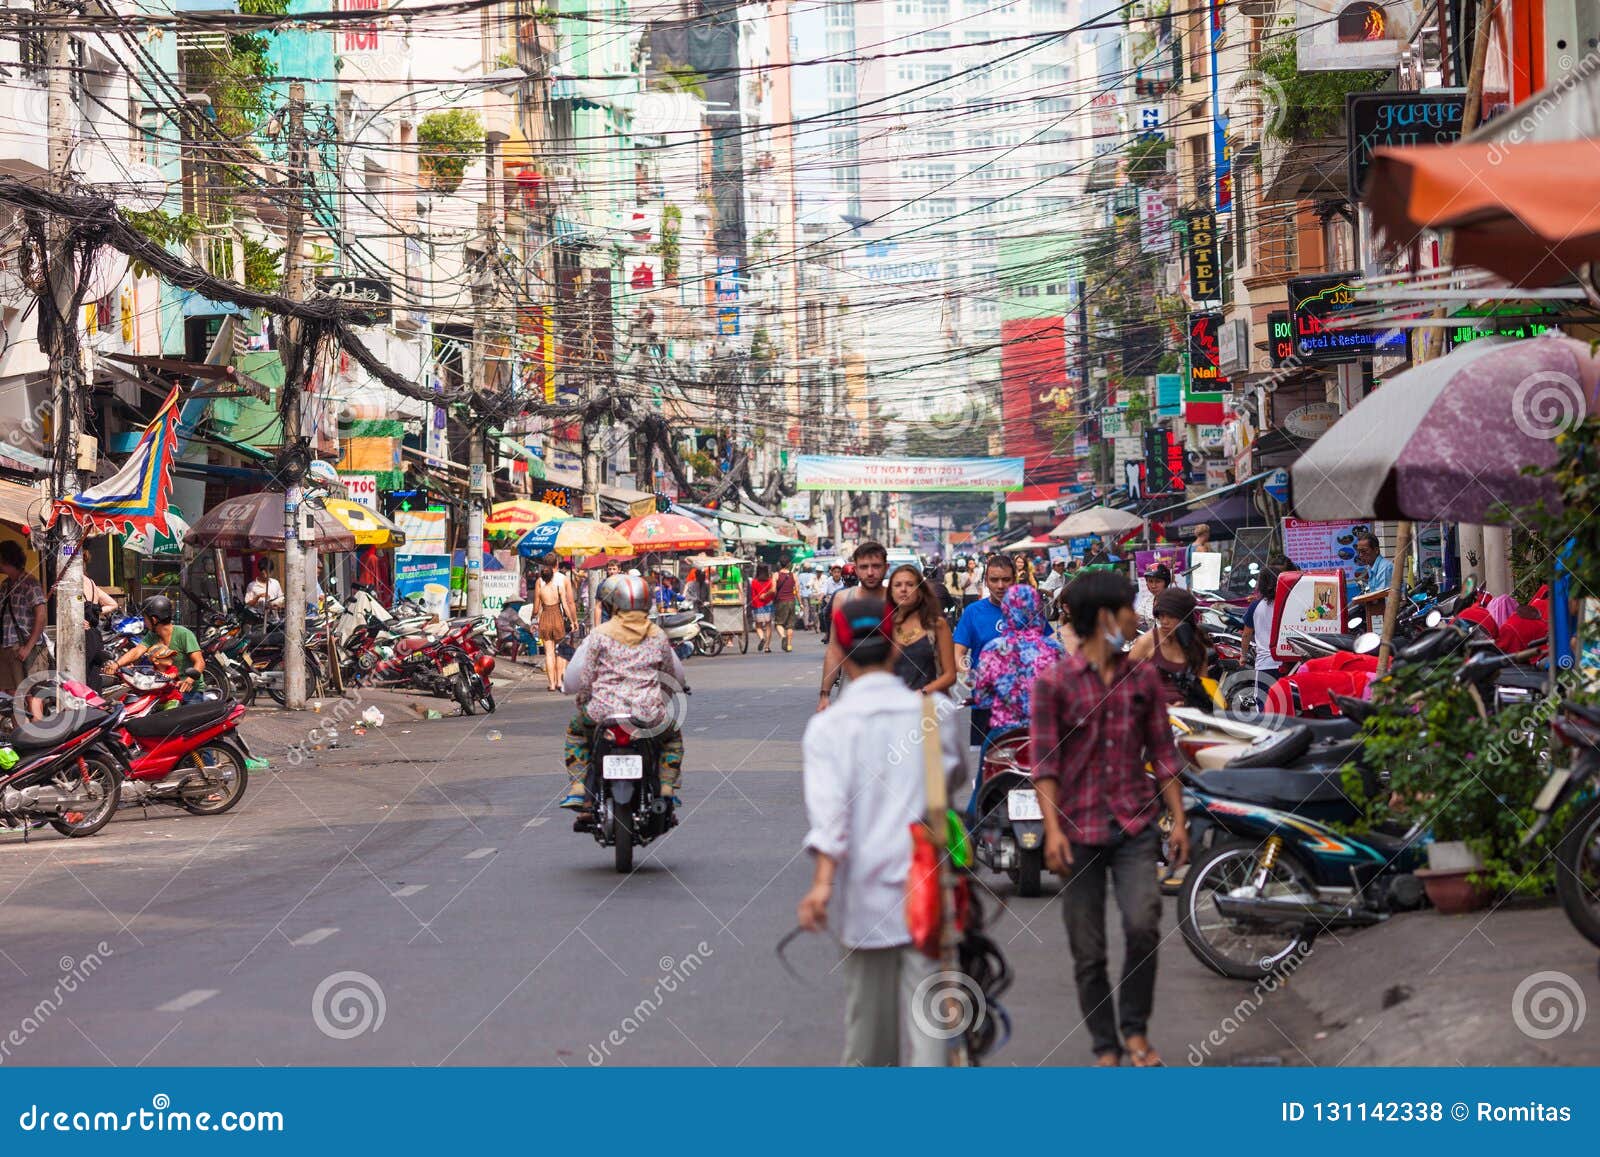 Ho Chi Minh City Street In Vietnam Editorial Stock Photo Image Of Motorbikes Lifestyle